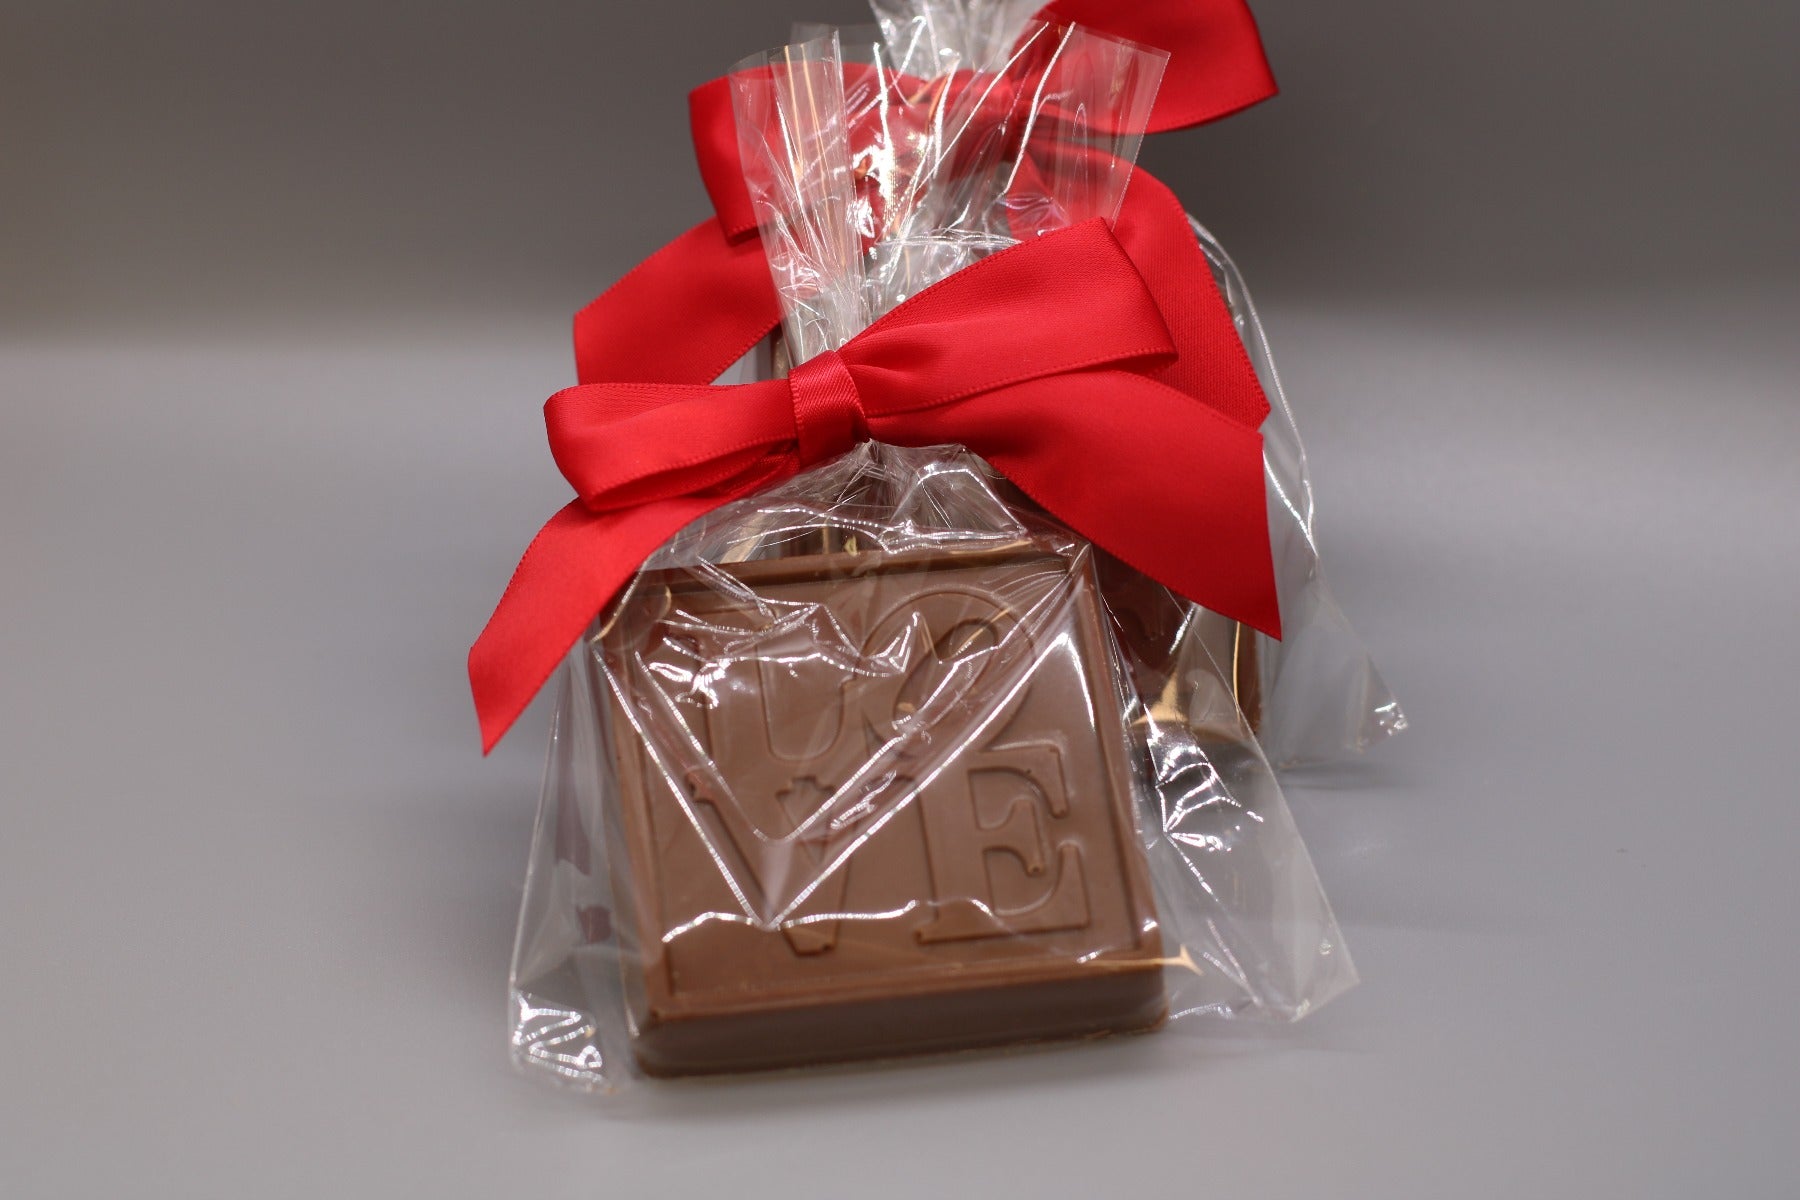 Philadelphia Milk Chocolate Love Statue in clear packaging tied with a red ribbon